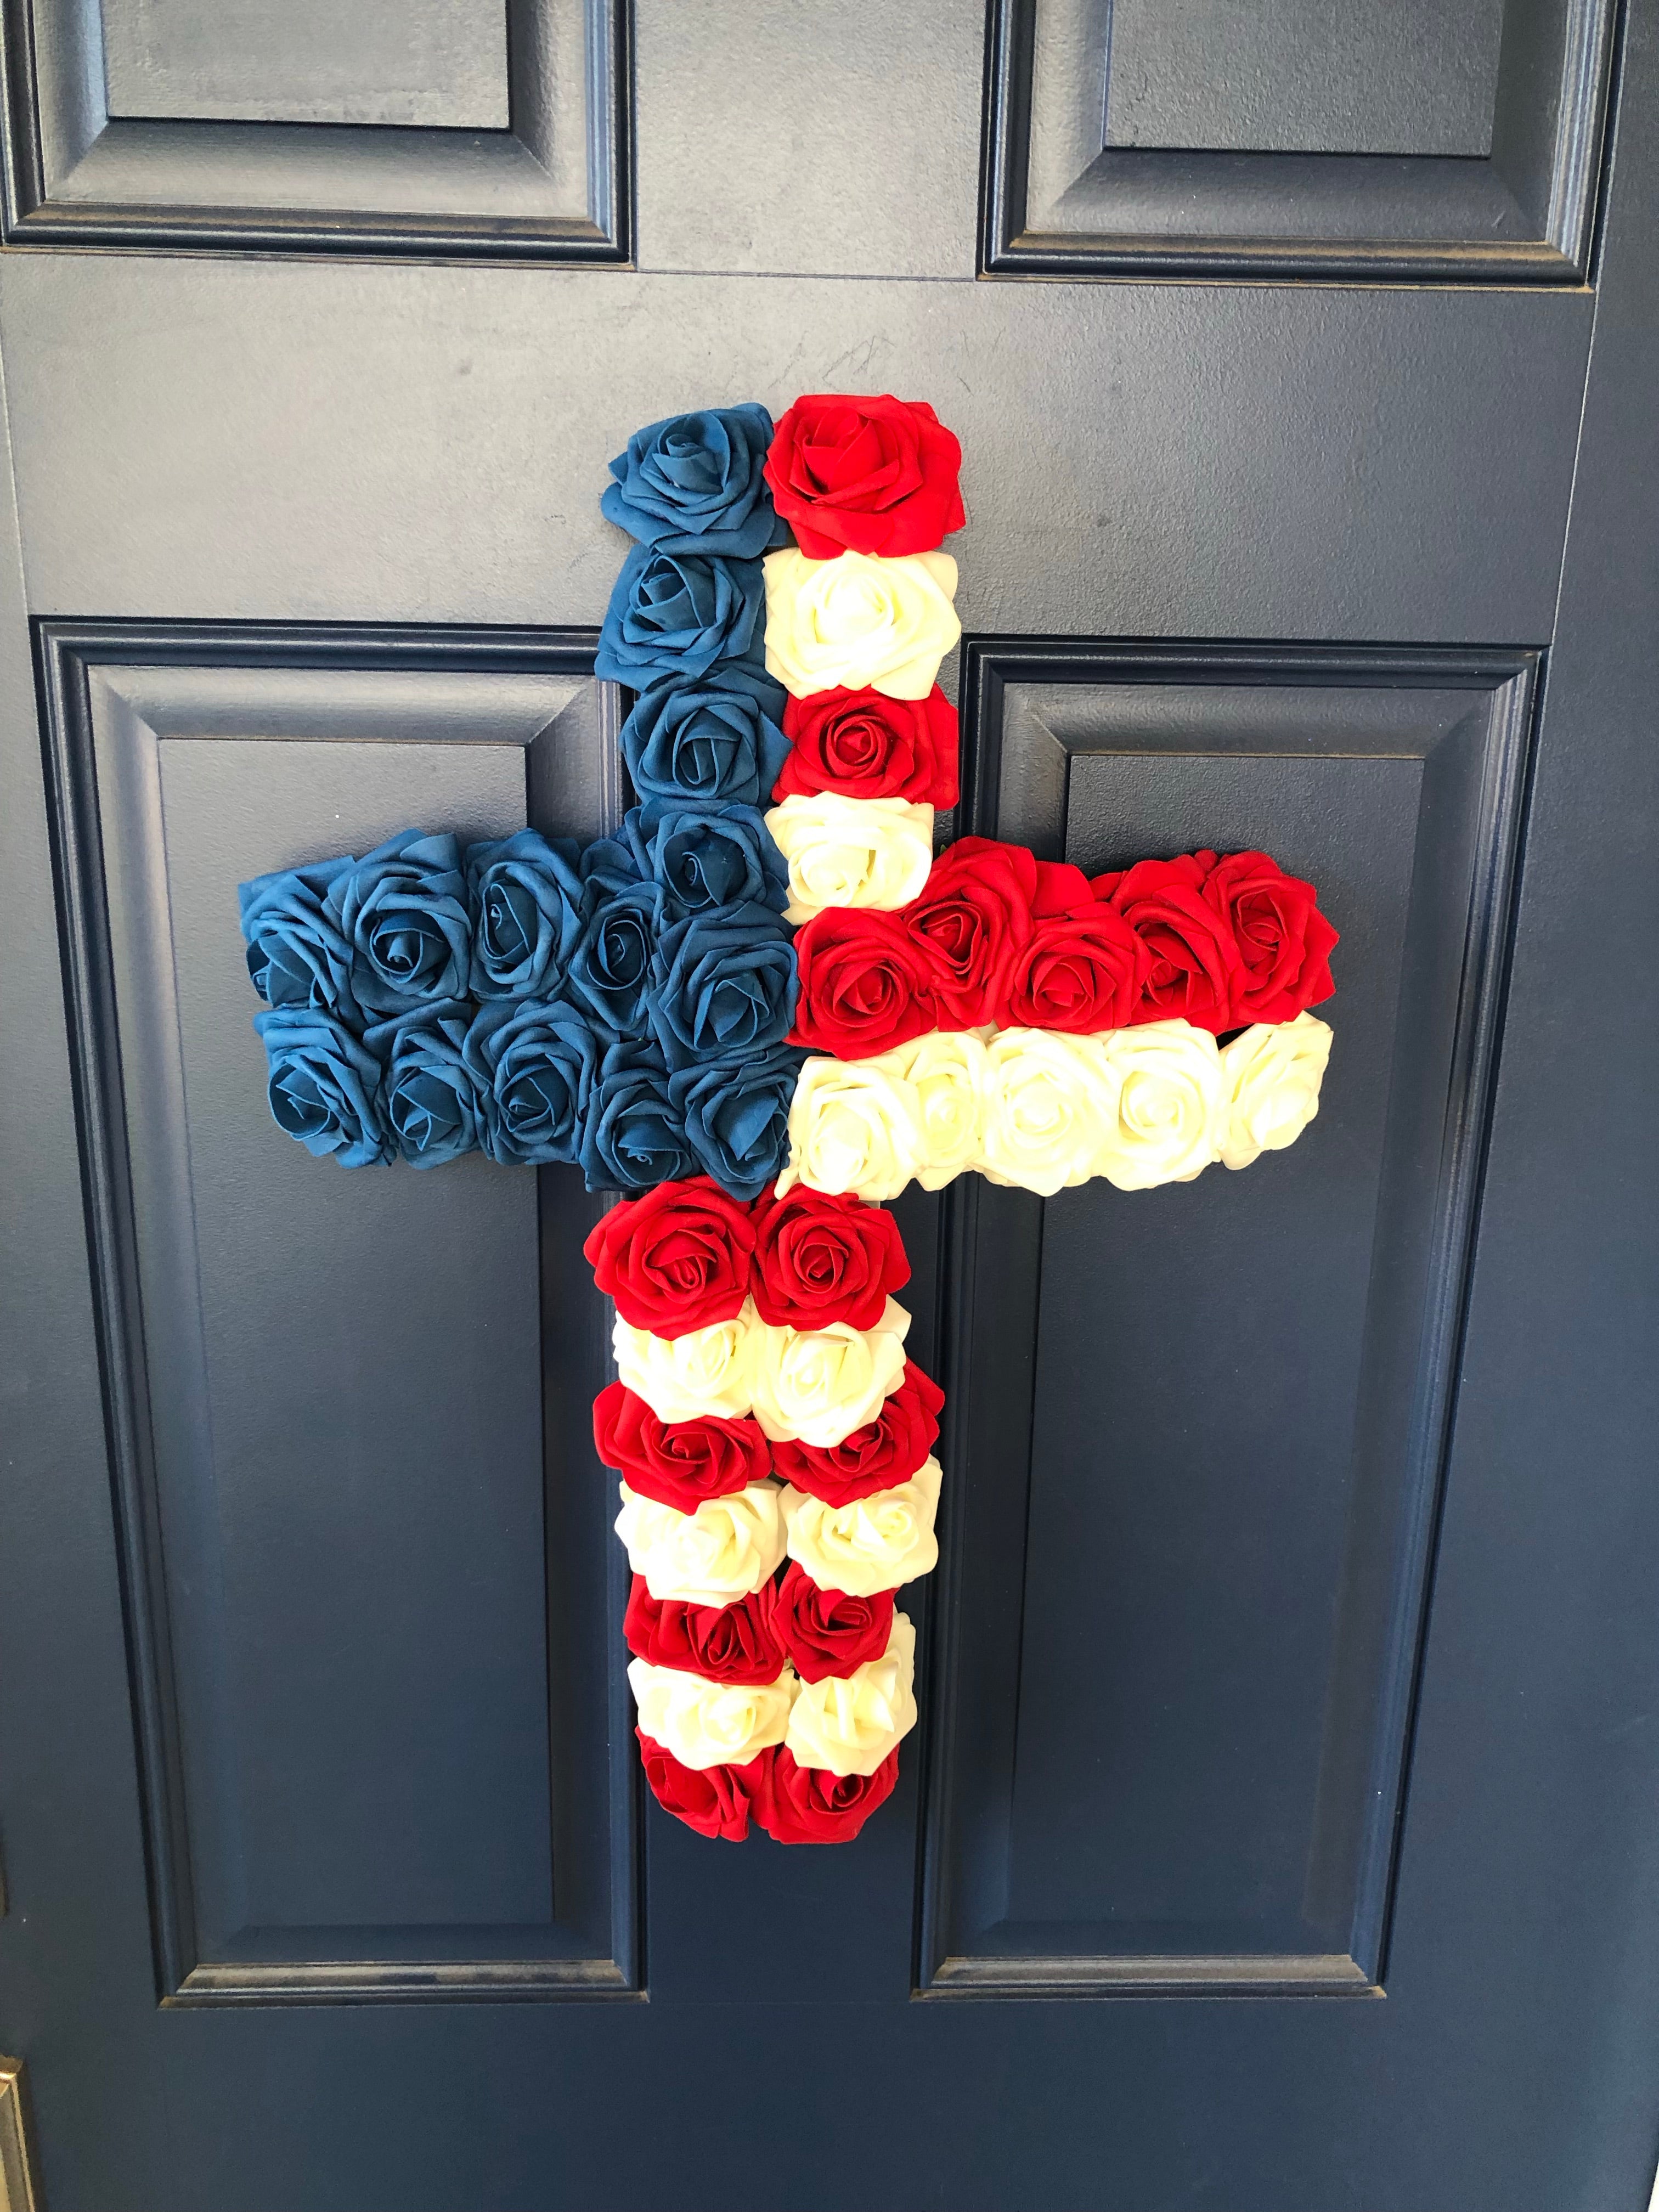 Top View of Red, White and Blue Roses in the shape of a cross on a blue door